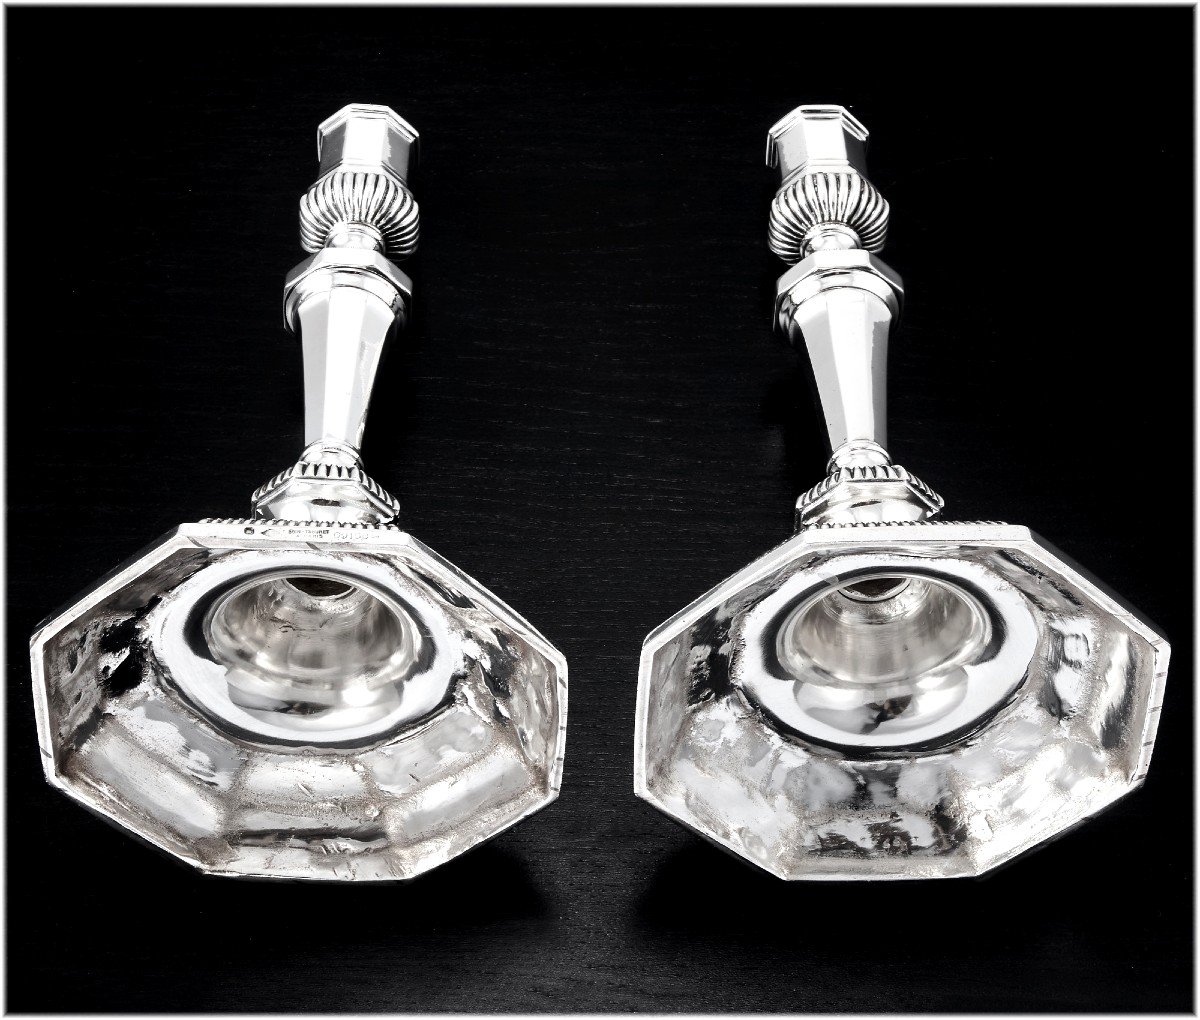 Boin Taburet: Pair Of 18th Century Style Solid Silver Candelsticks-photo-2